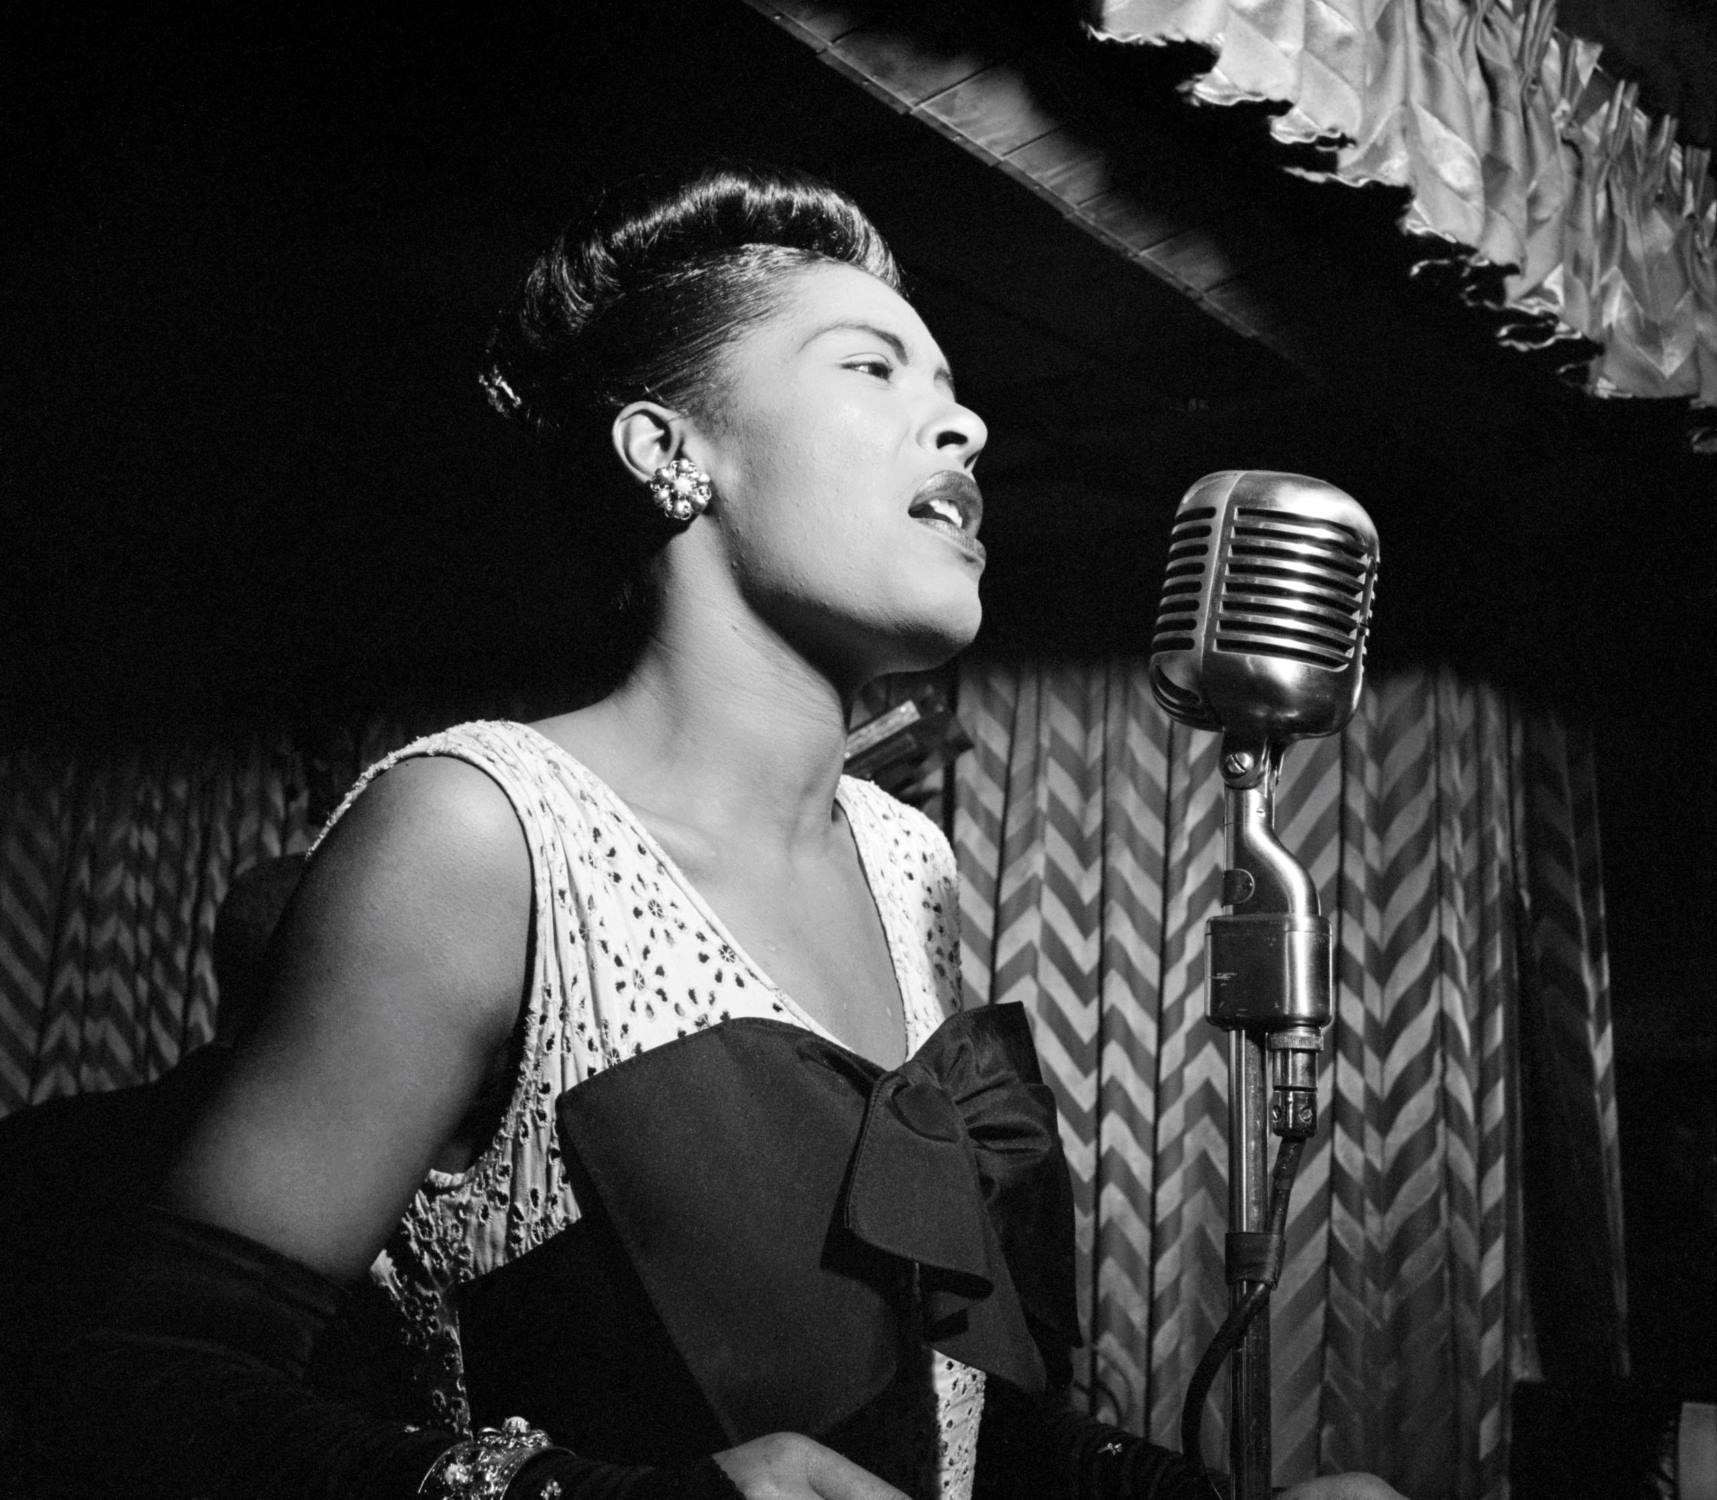 She Was Born Eleanora Fagan. Who Was This American Jazz Singer And Song Writer?